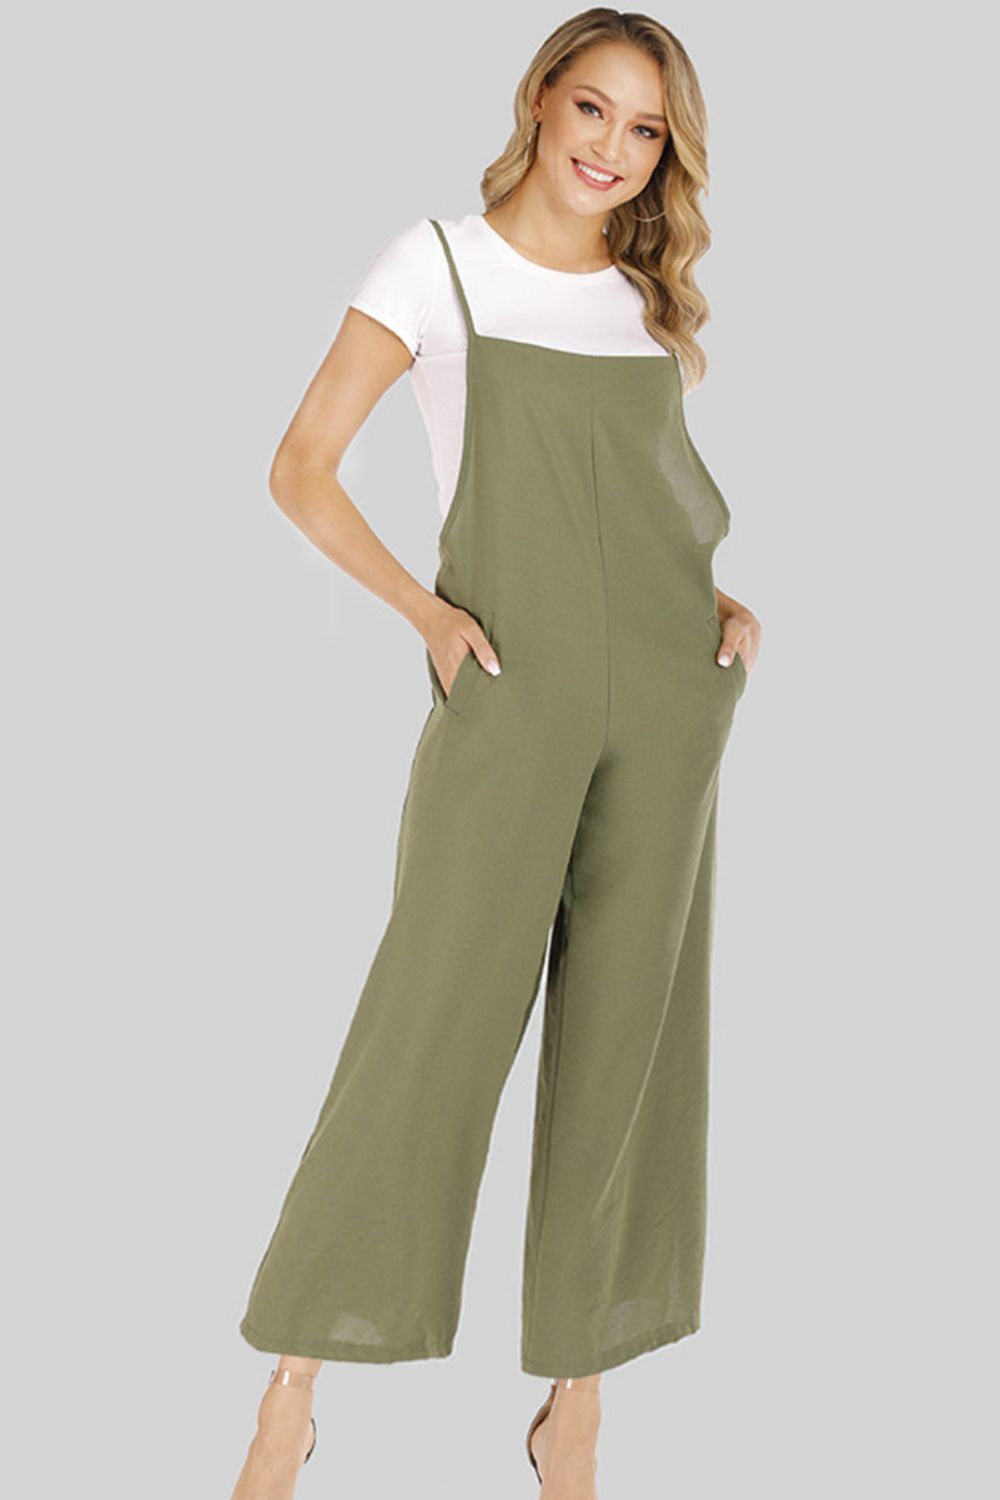 Full Size Cropped Wide Leg Overalls with Pockets - Green / S - Bottoms - Overalls - 6 - 2024